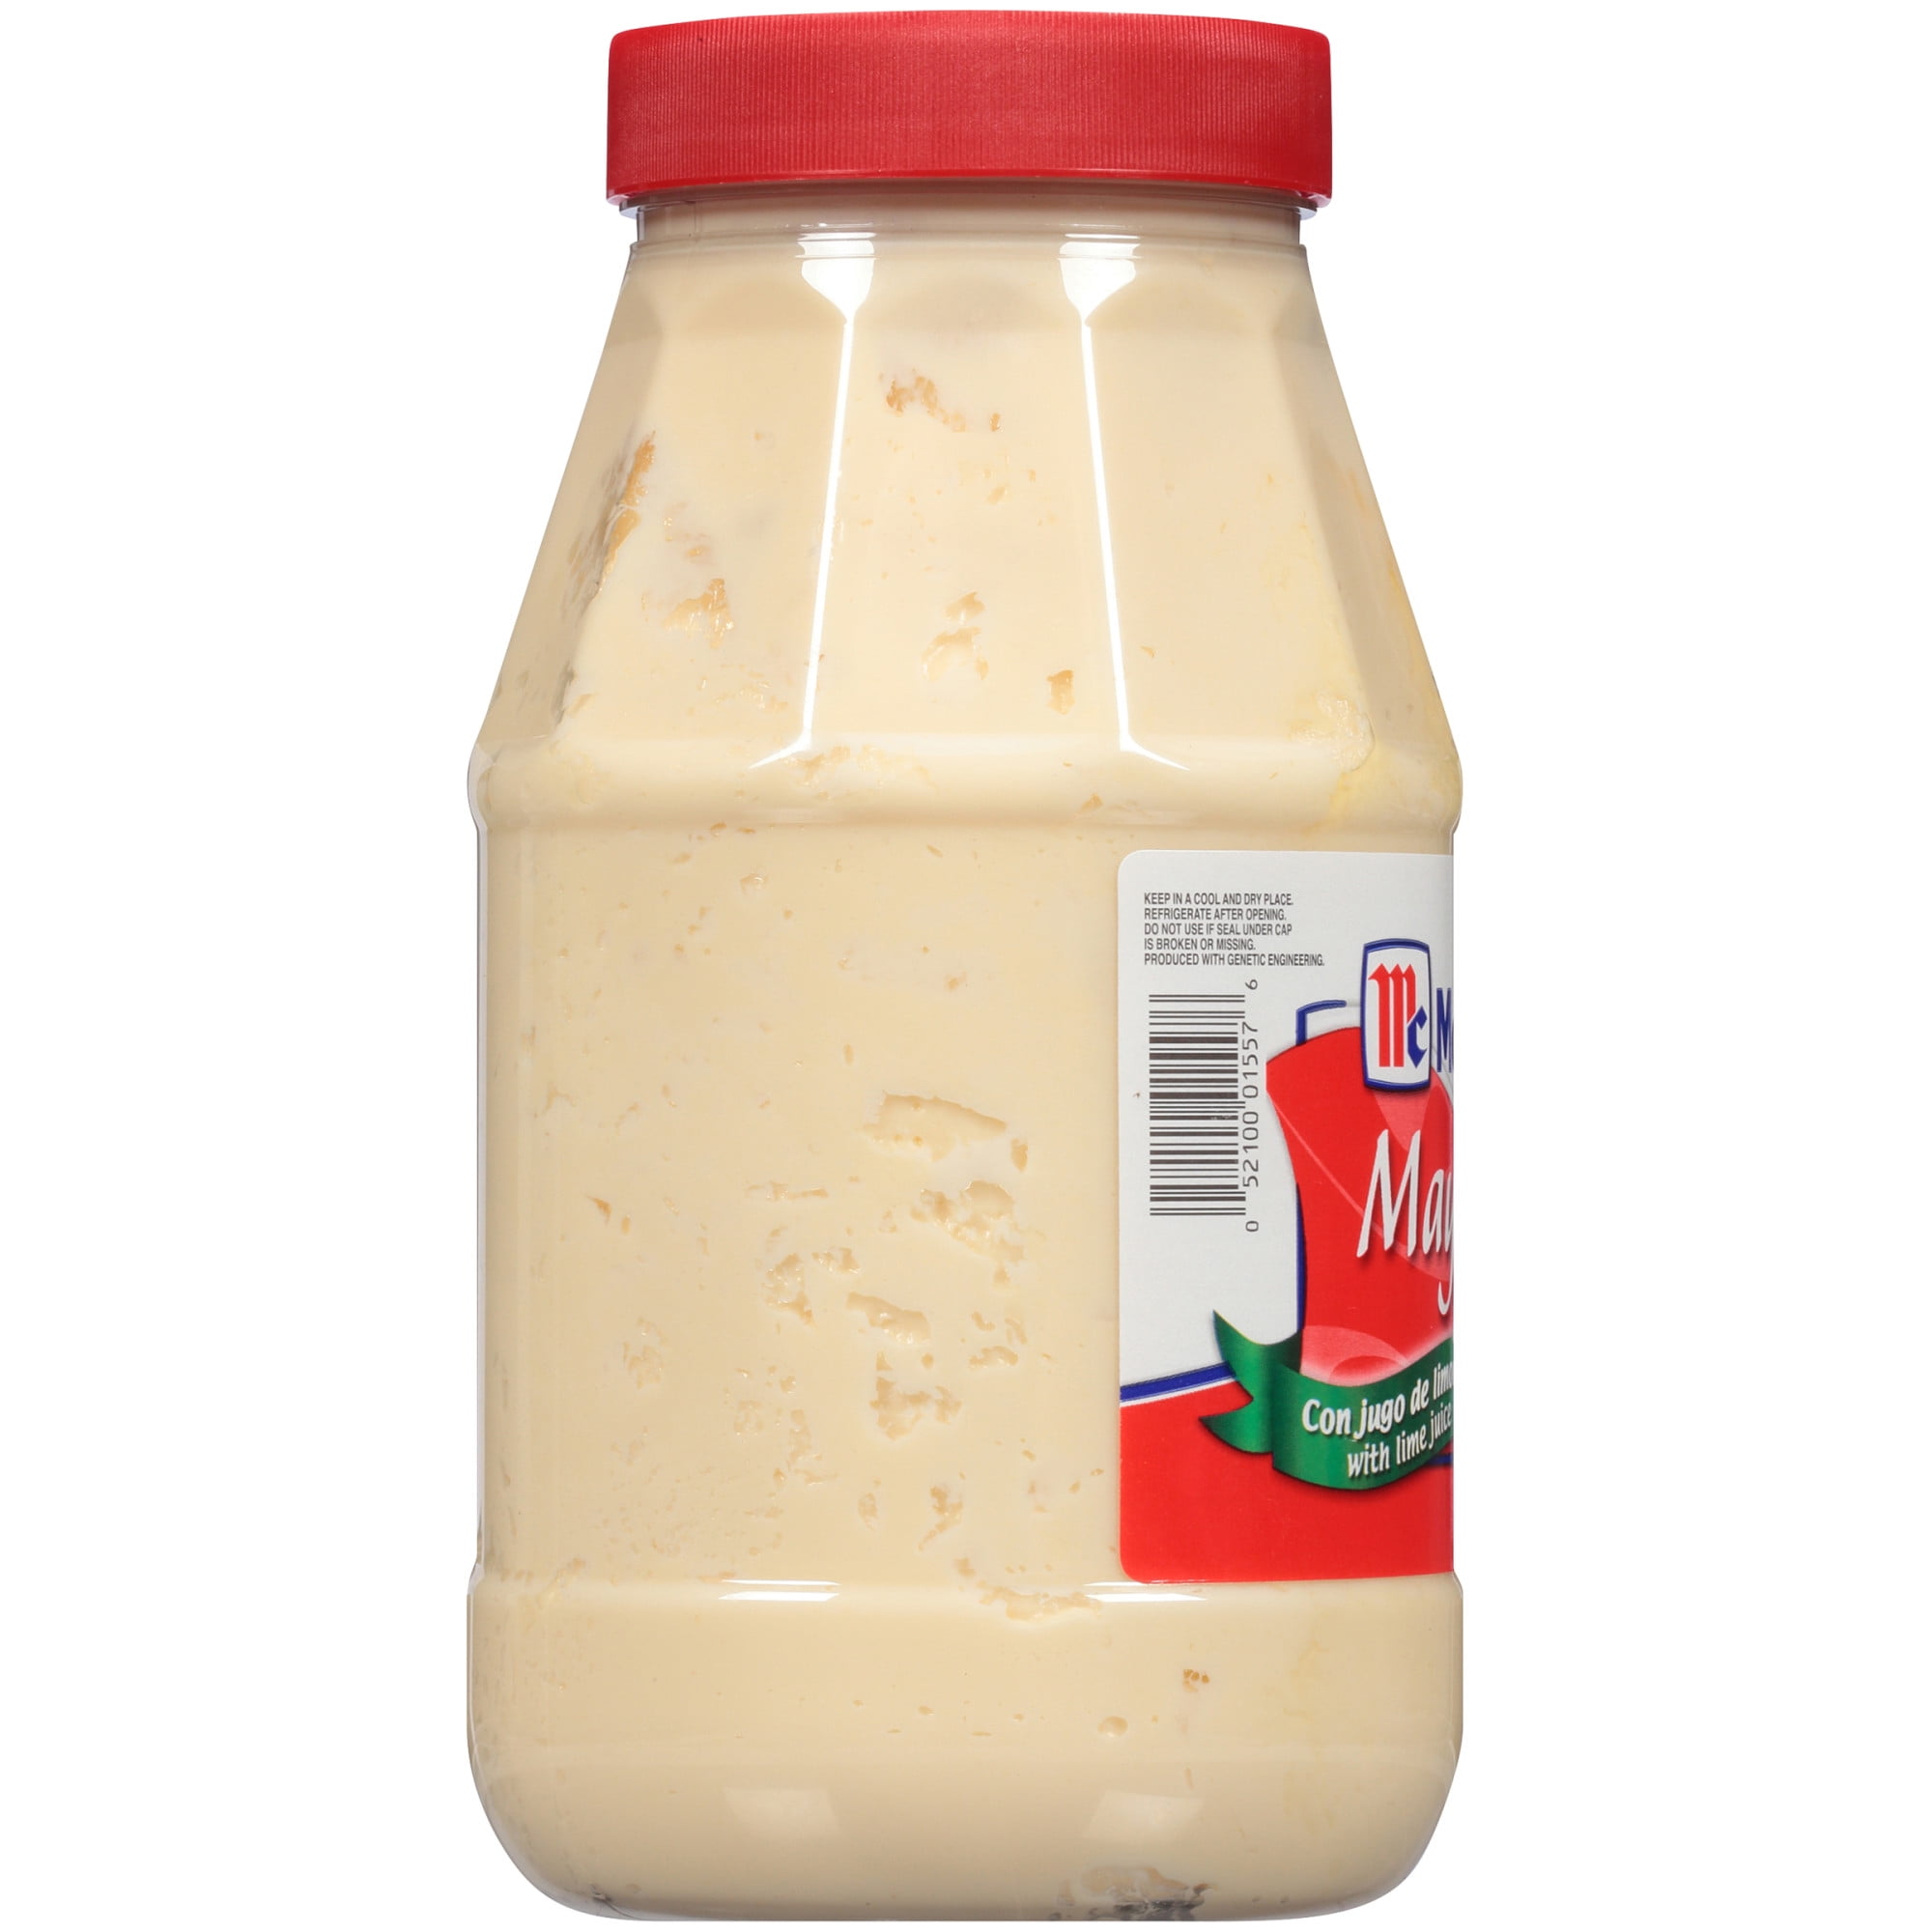 Get McCormick Mexican Mayonnaise with Lime Delivered